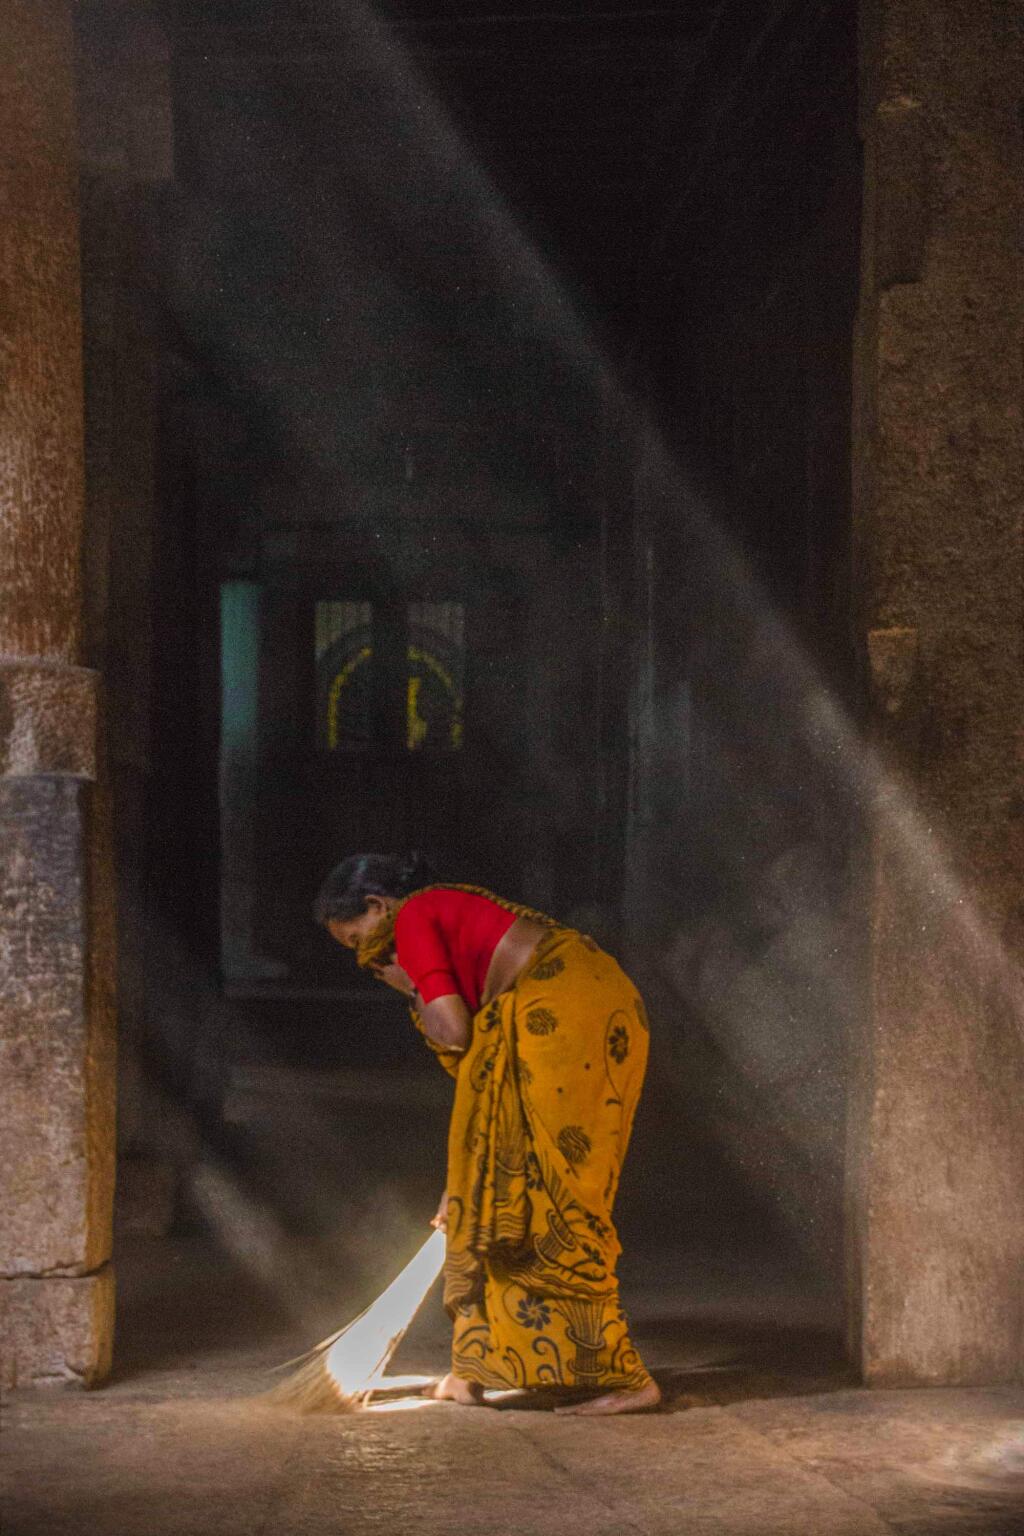 This photo of a woman sweeping was shot by Kaeti Bailie during a trip to India led by photographer Ron Zak. It is one of the photos that are on display at the Sonoma Community Center's Gallery 212.